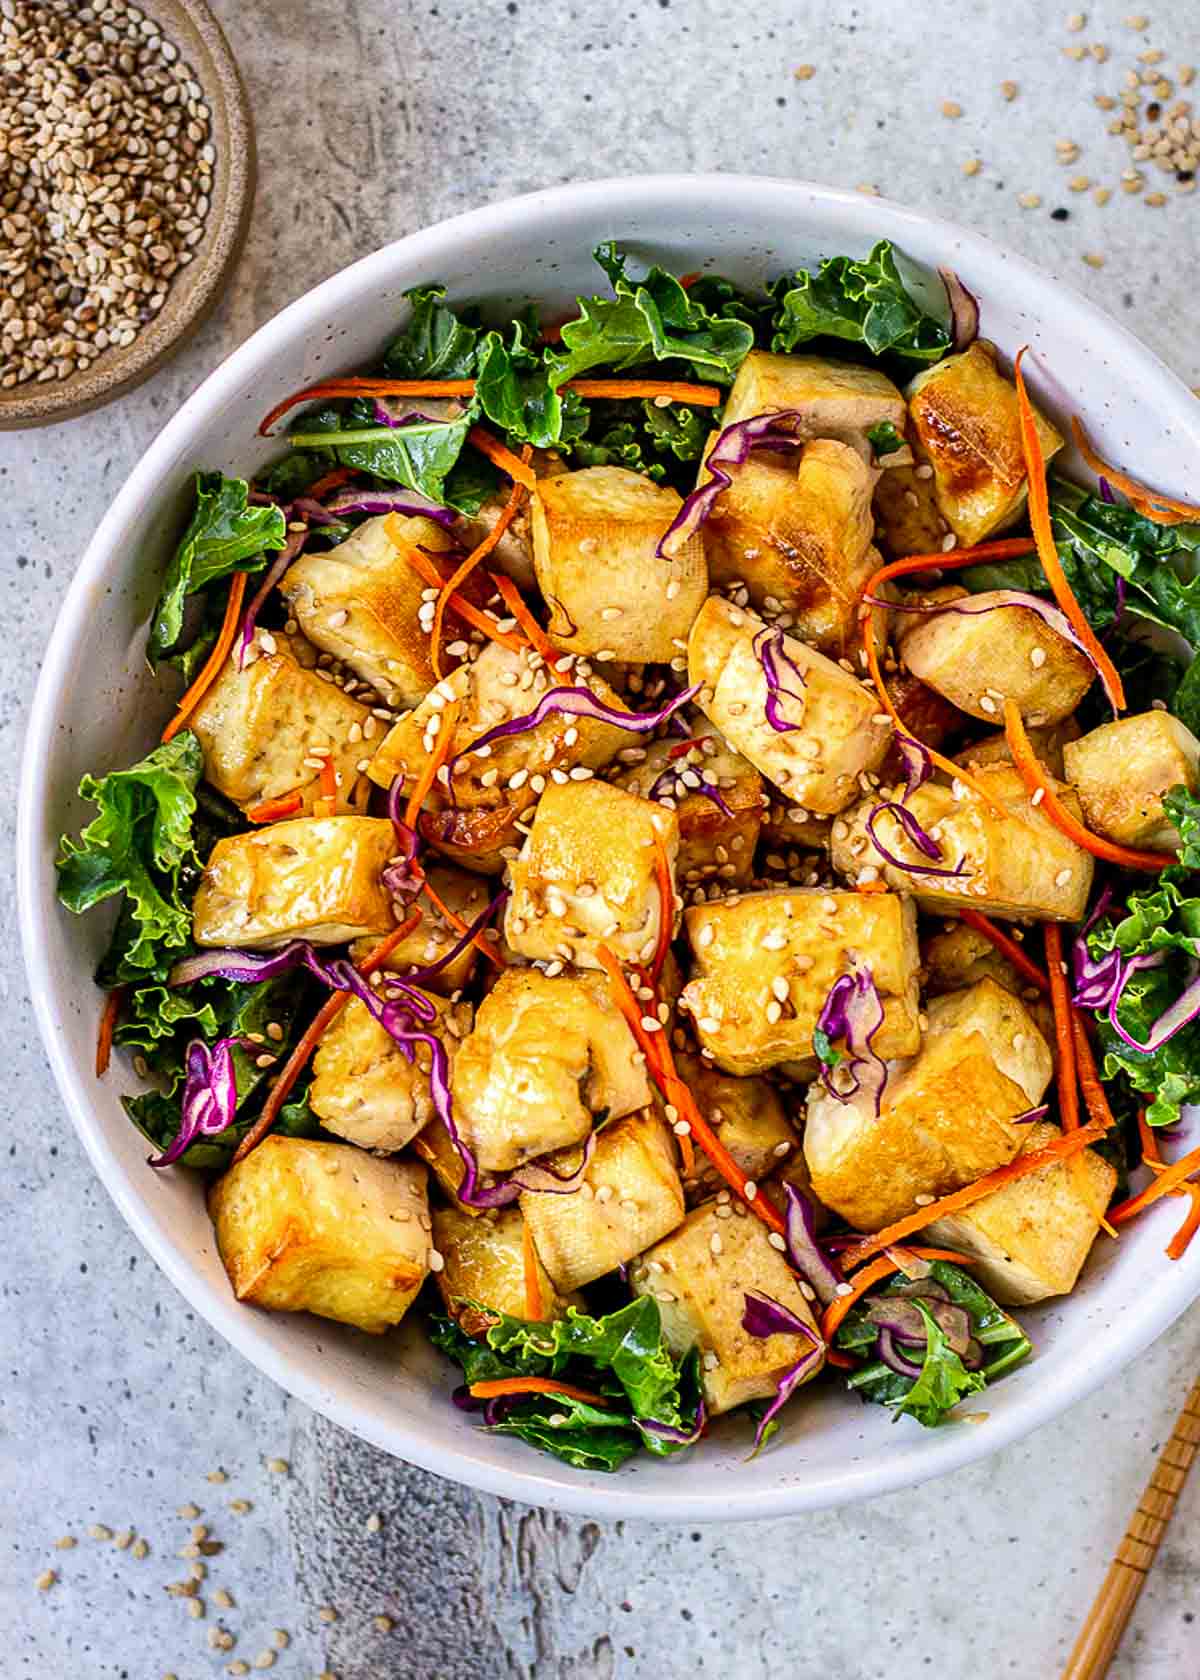 Bowl of crispy tofu surrounded by green leaves, red cabbage and carrots. Topped with sesame seeds.